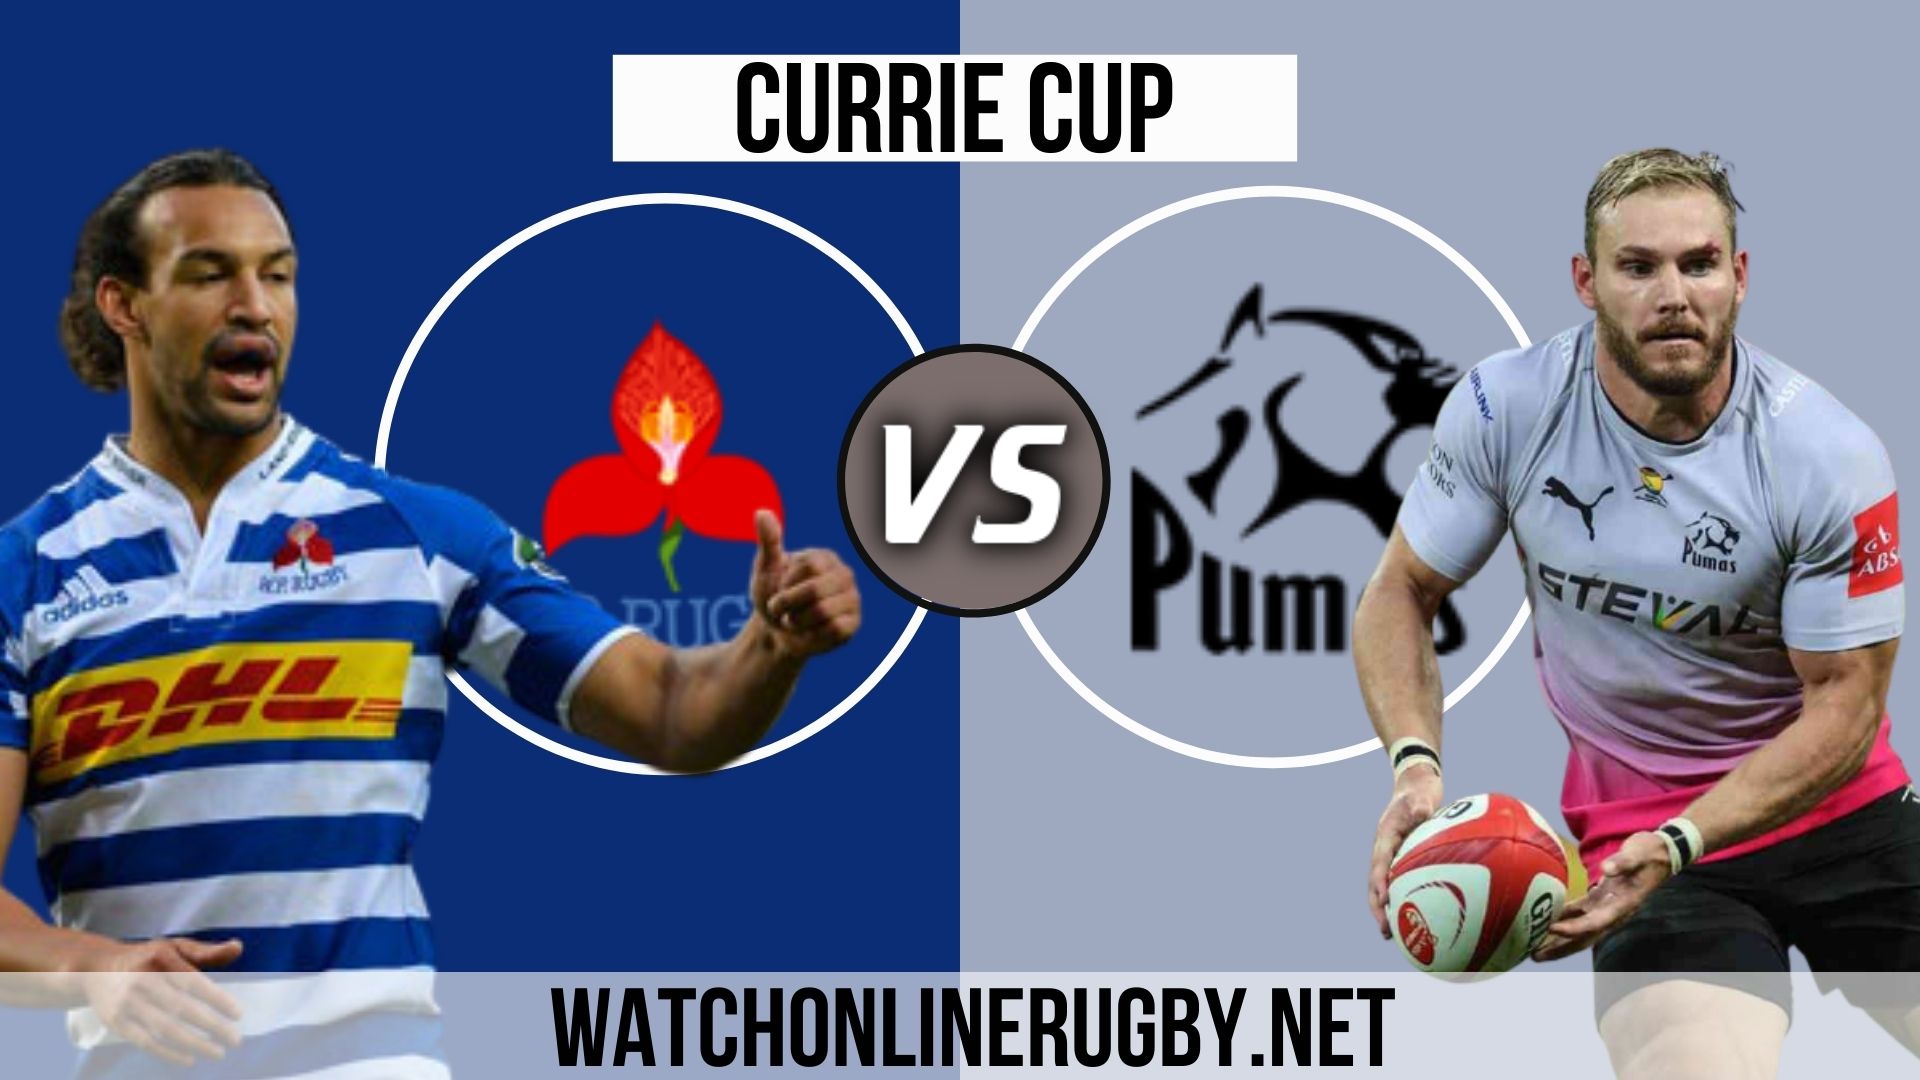 western-province-vs-pumas-live-stream-currie-cup